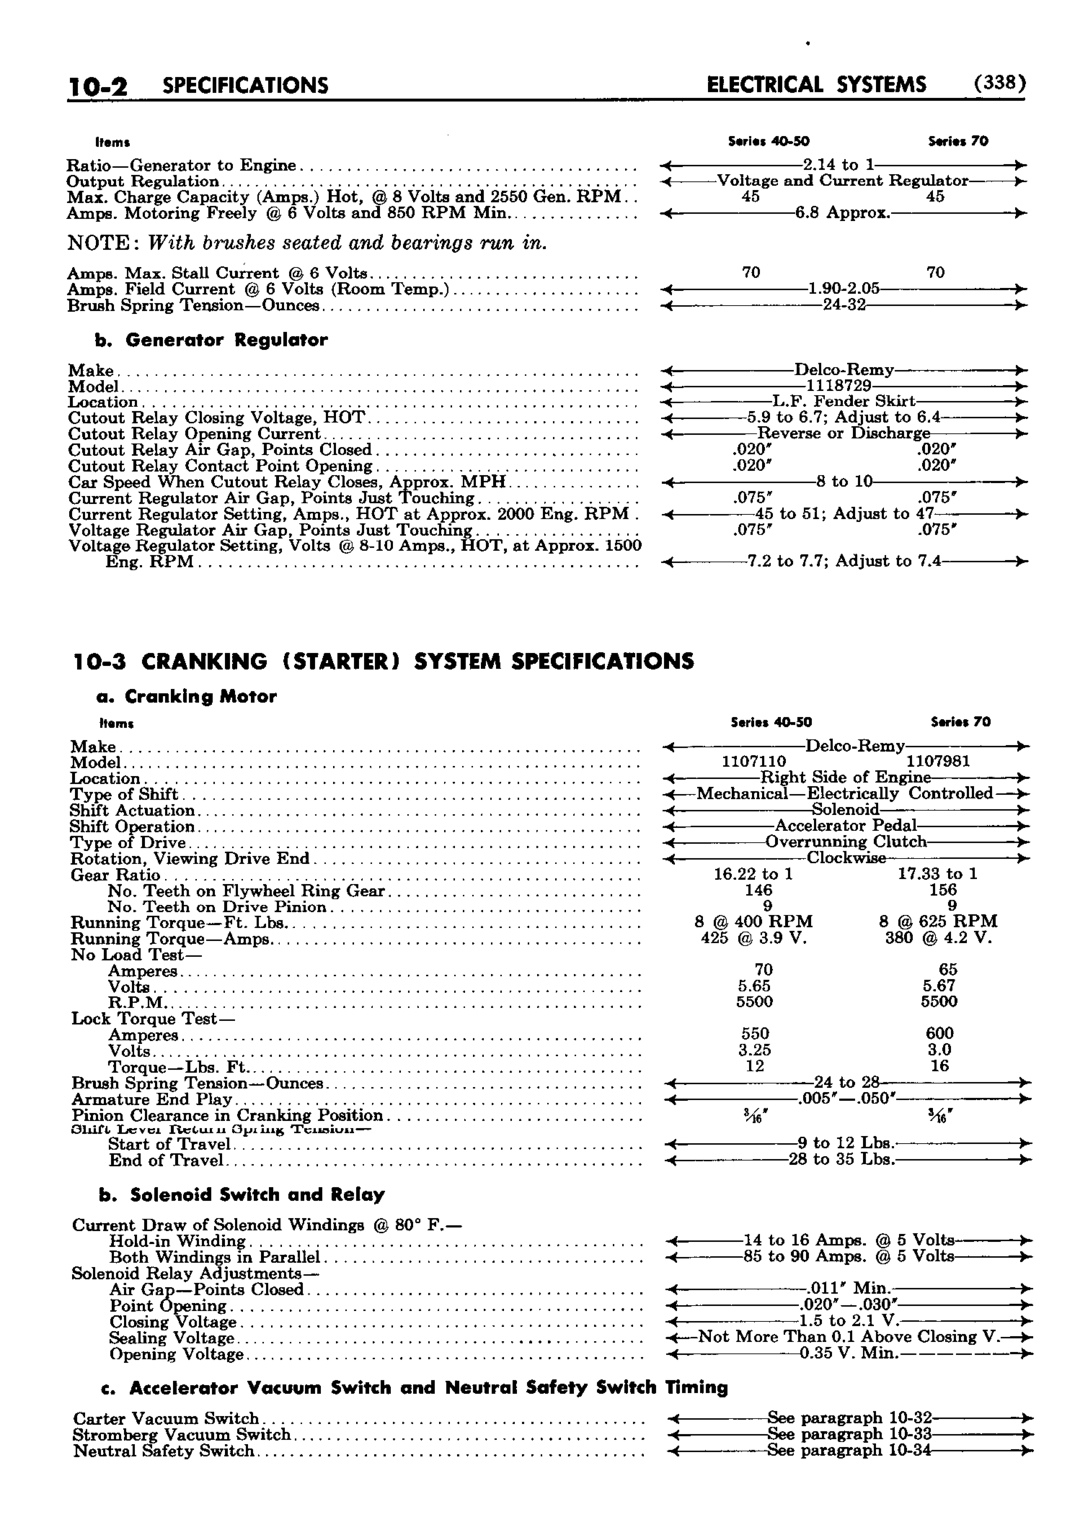 n_11 1952 Buick Shop Manual - Electrical Systems-002-002.jpg